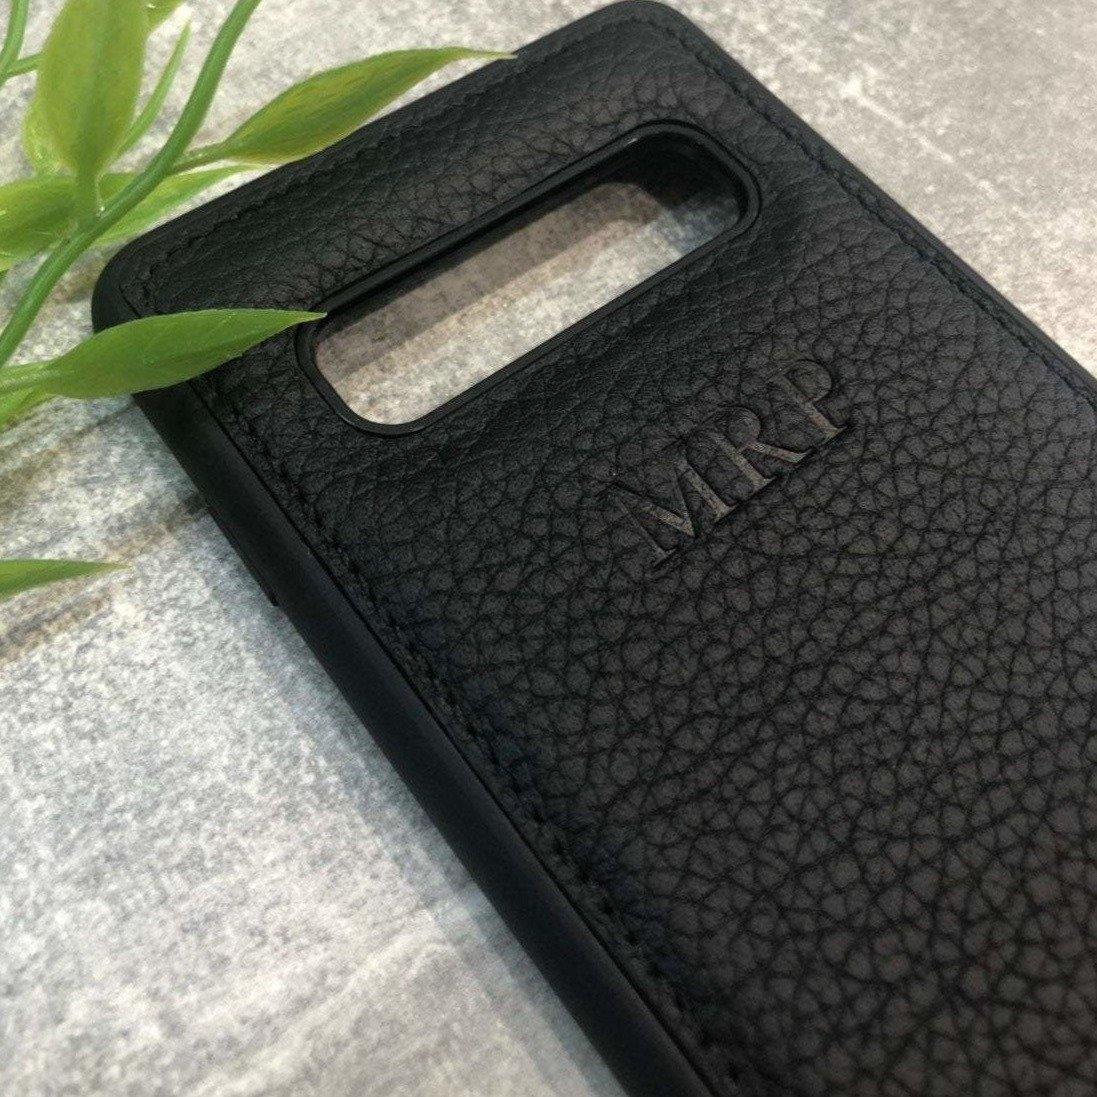 Samsung S10 leather phone case personalised with name or initials - PersonalisebyLisa